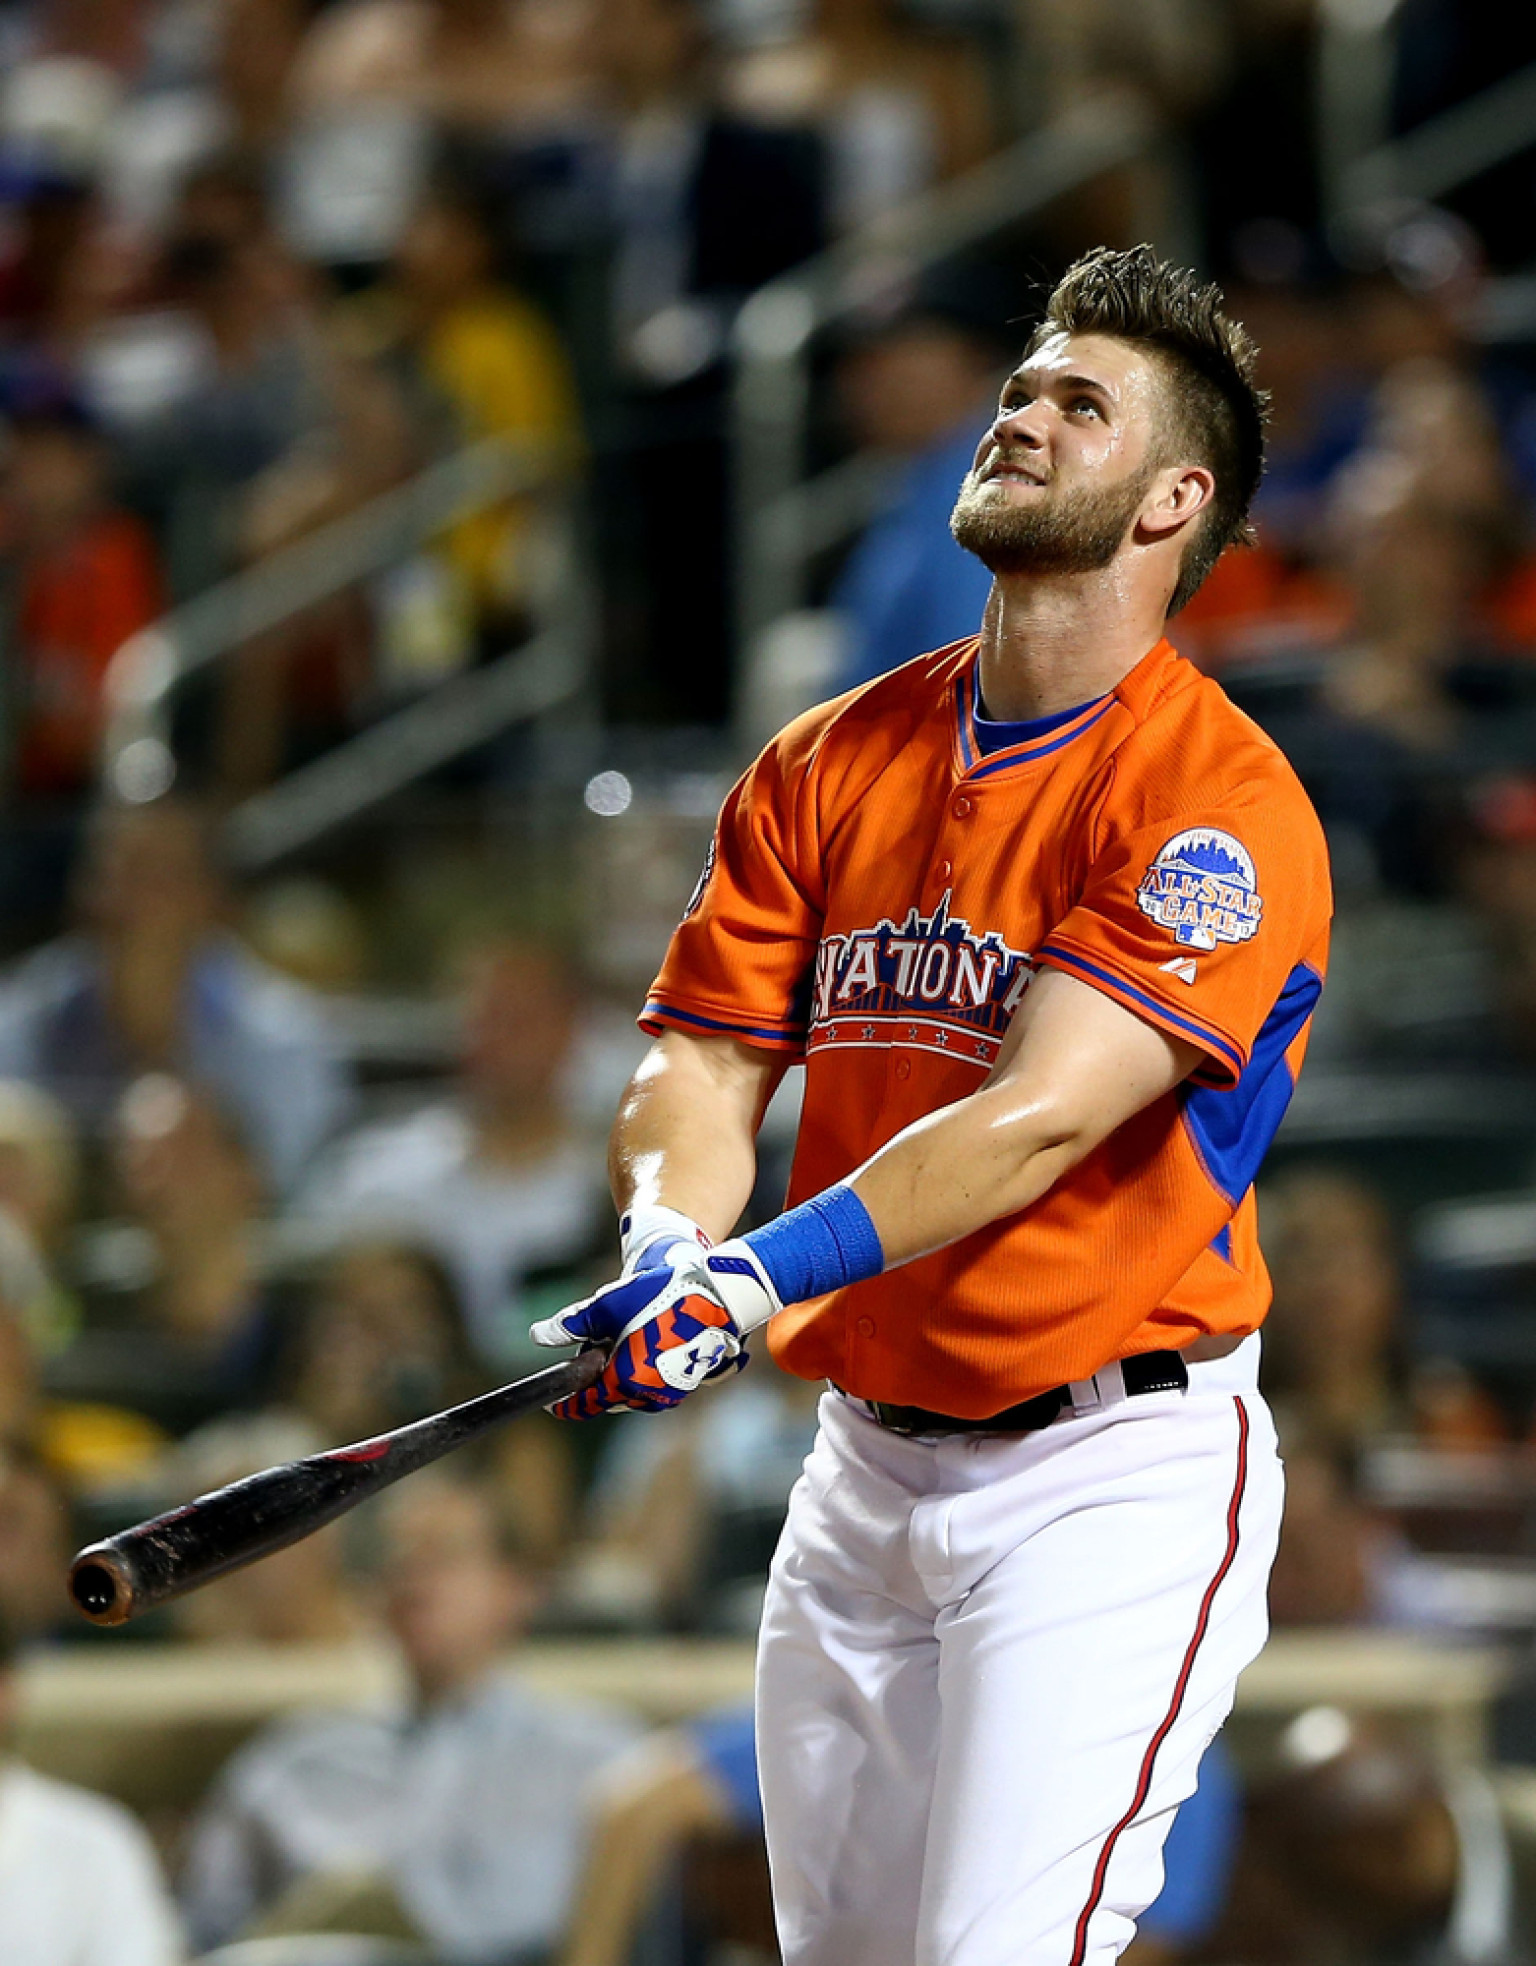 Bryce Harper's Brother's Mustache Sticks Out At 2013 Home Run Derby (PHOTO)1536 x 1966